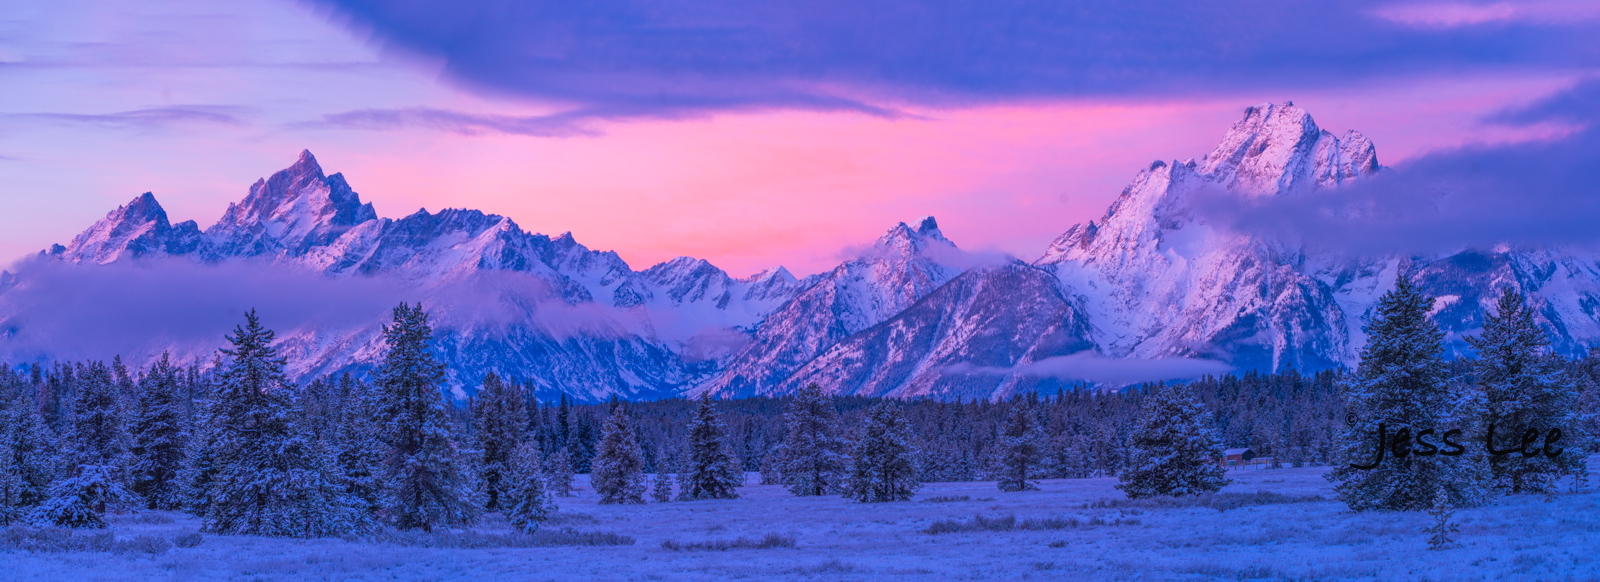 Morning in the Tetons.